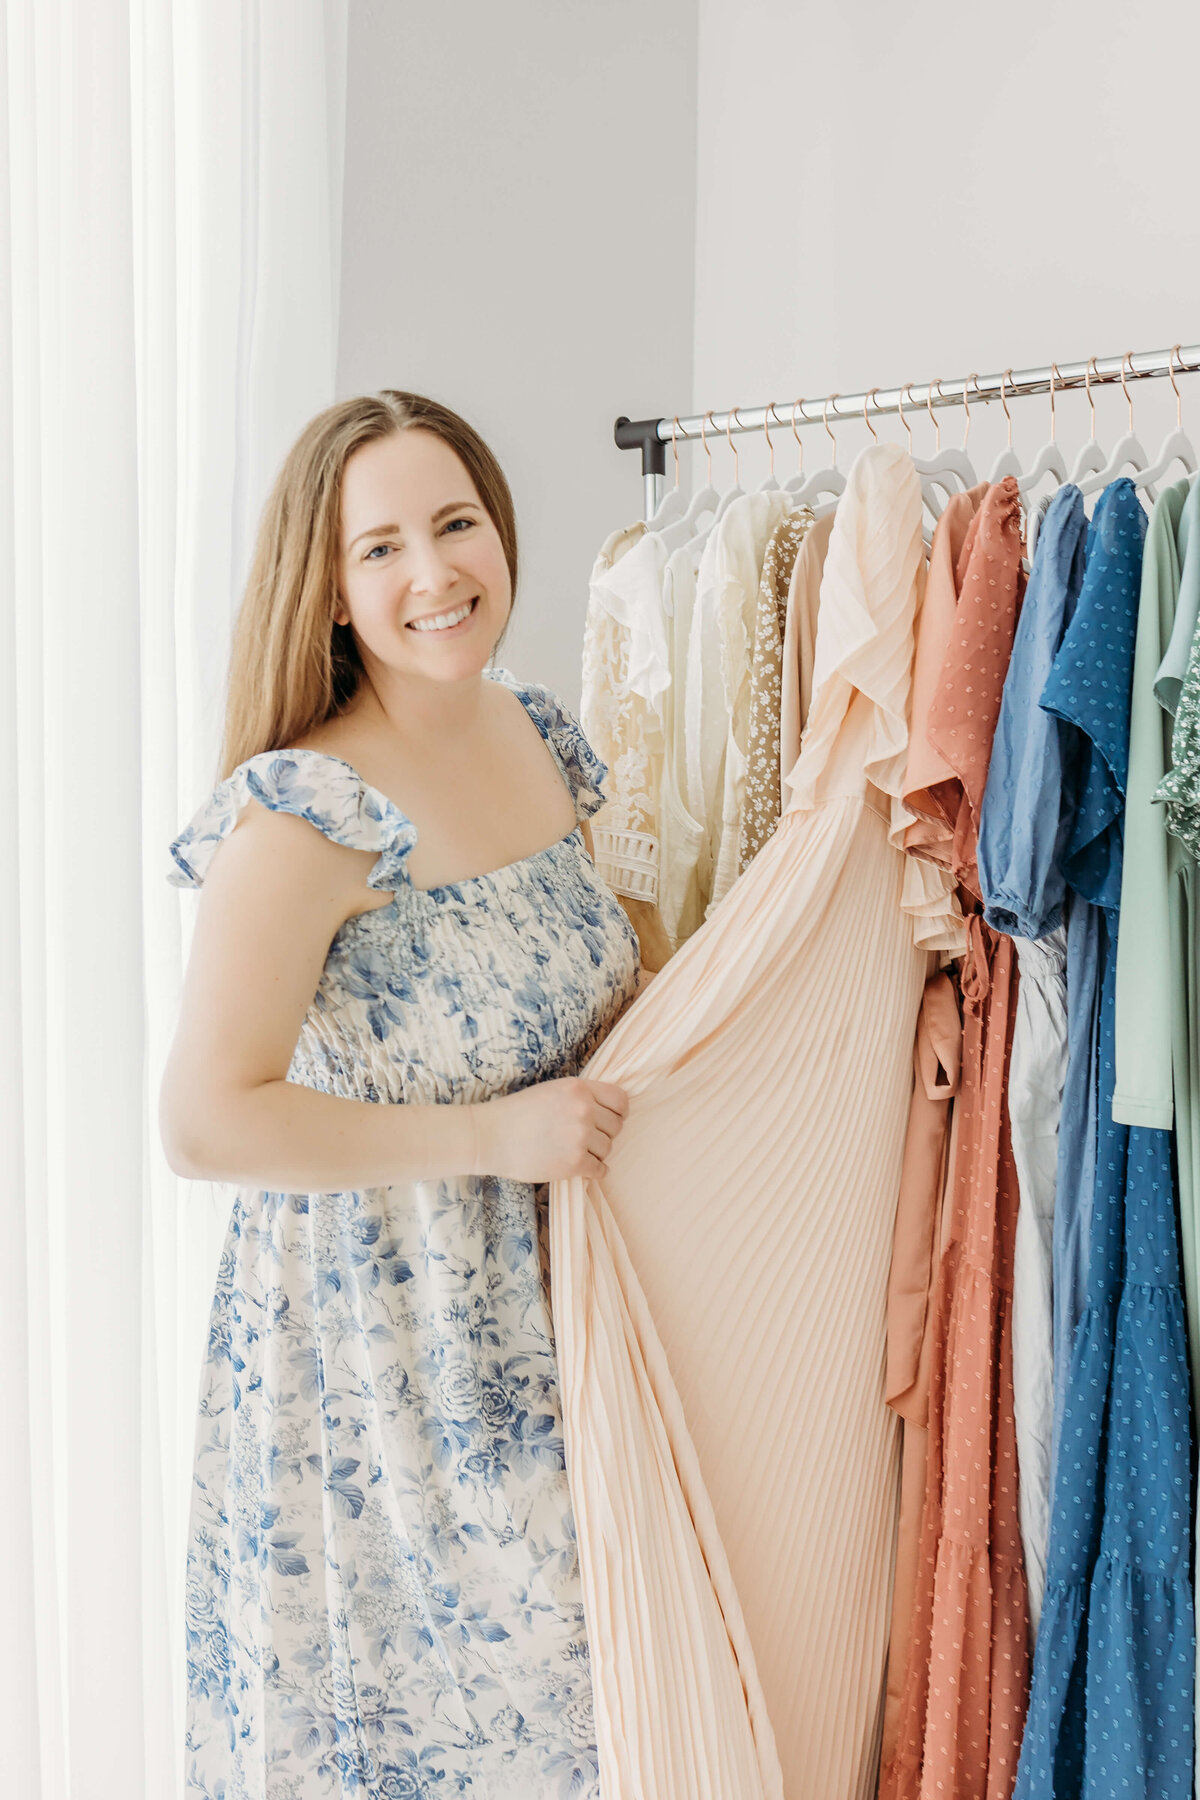 Woman showing off beautiful garment rack and wardrobe for the whole family